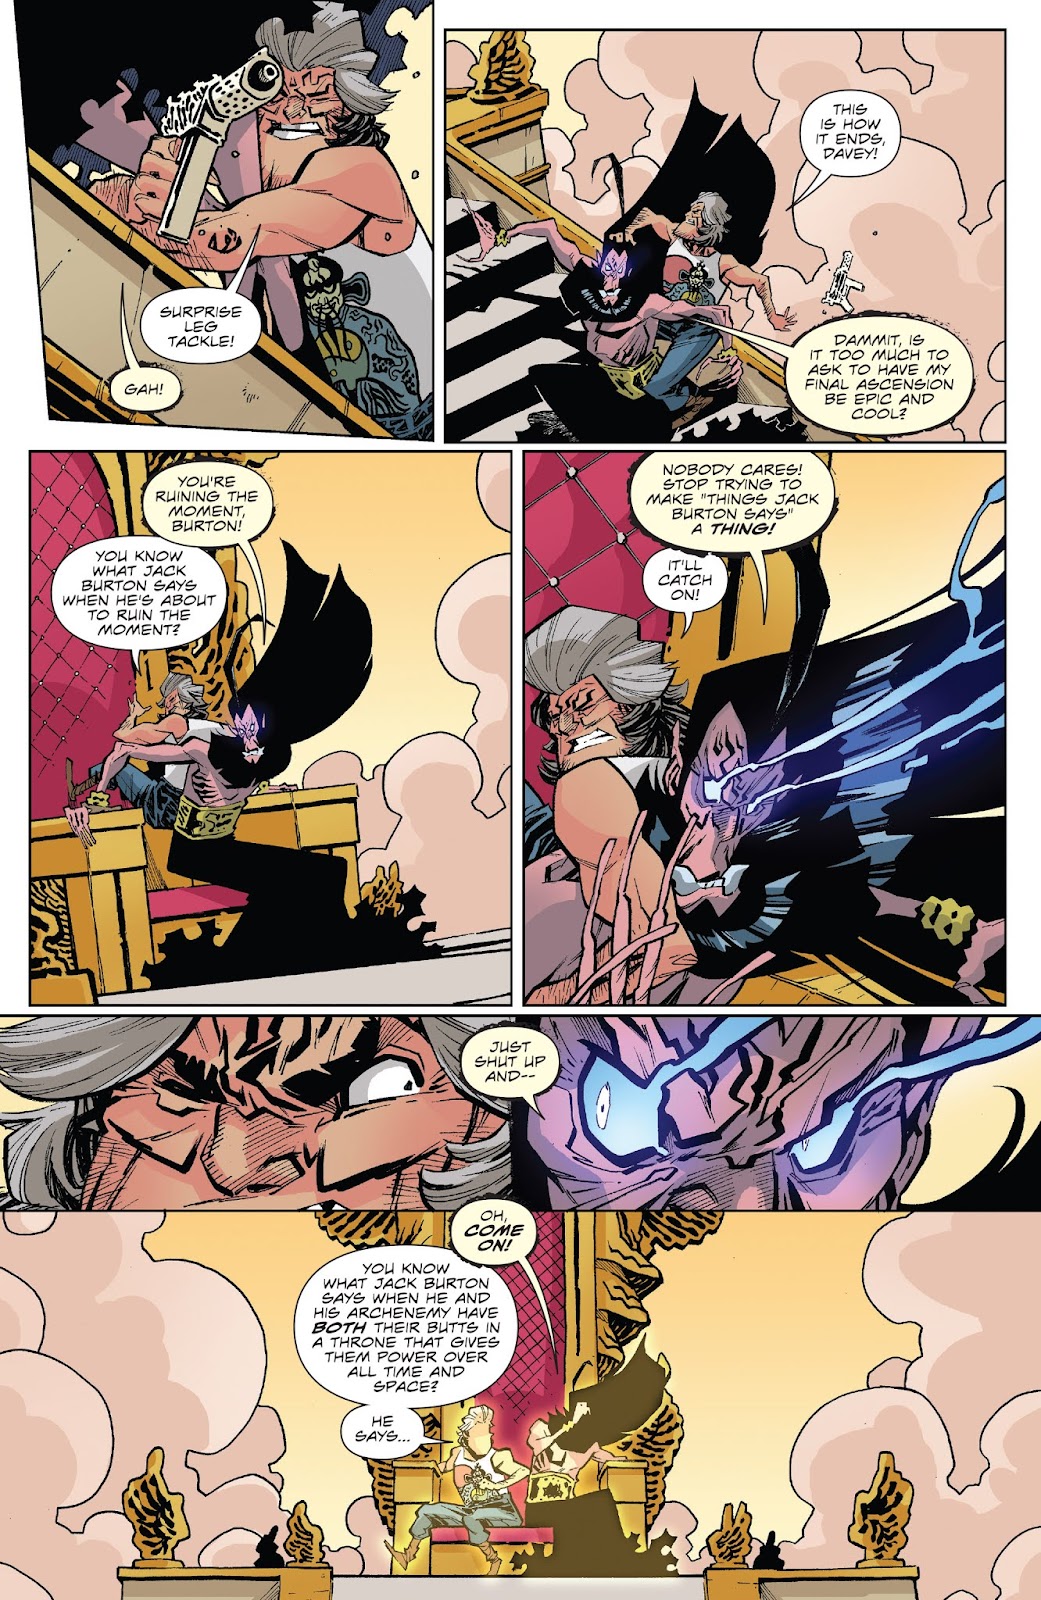 Big Trouble in Little China: Old Man Jack issue 12 - Page 11